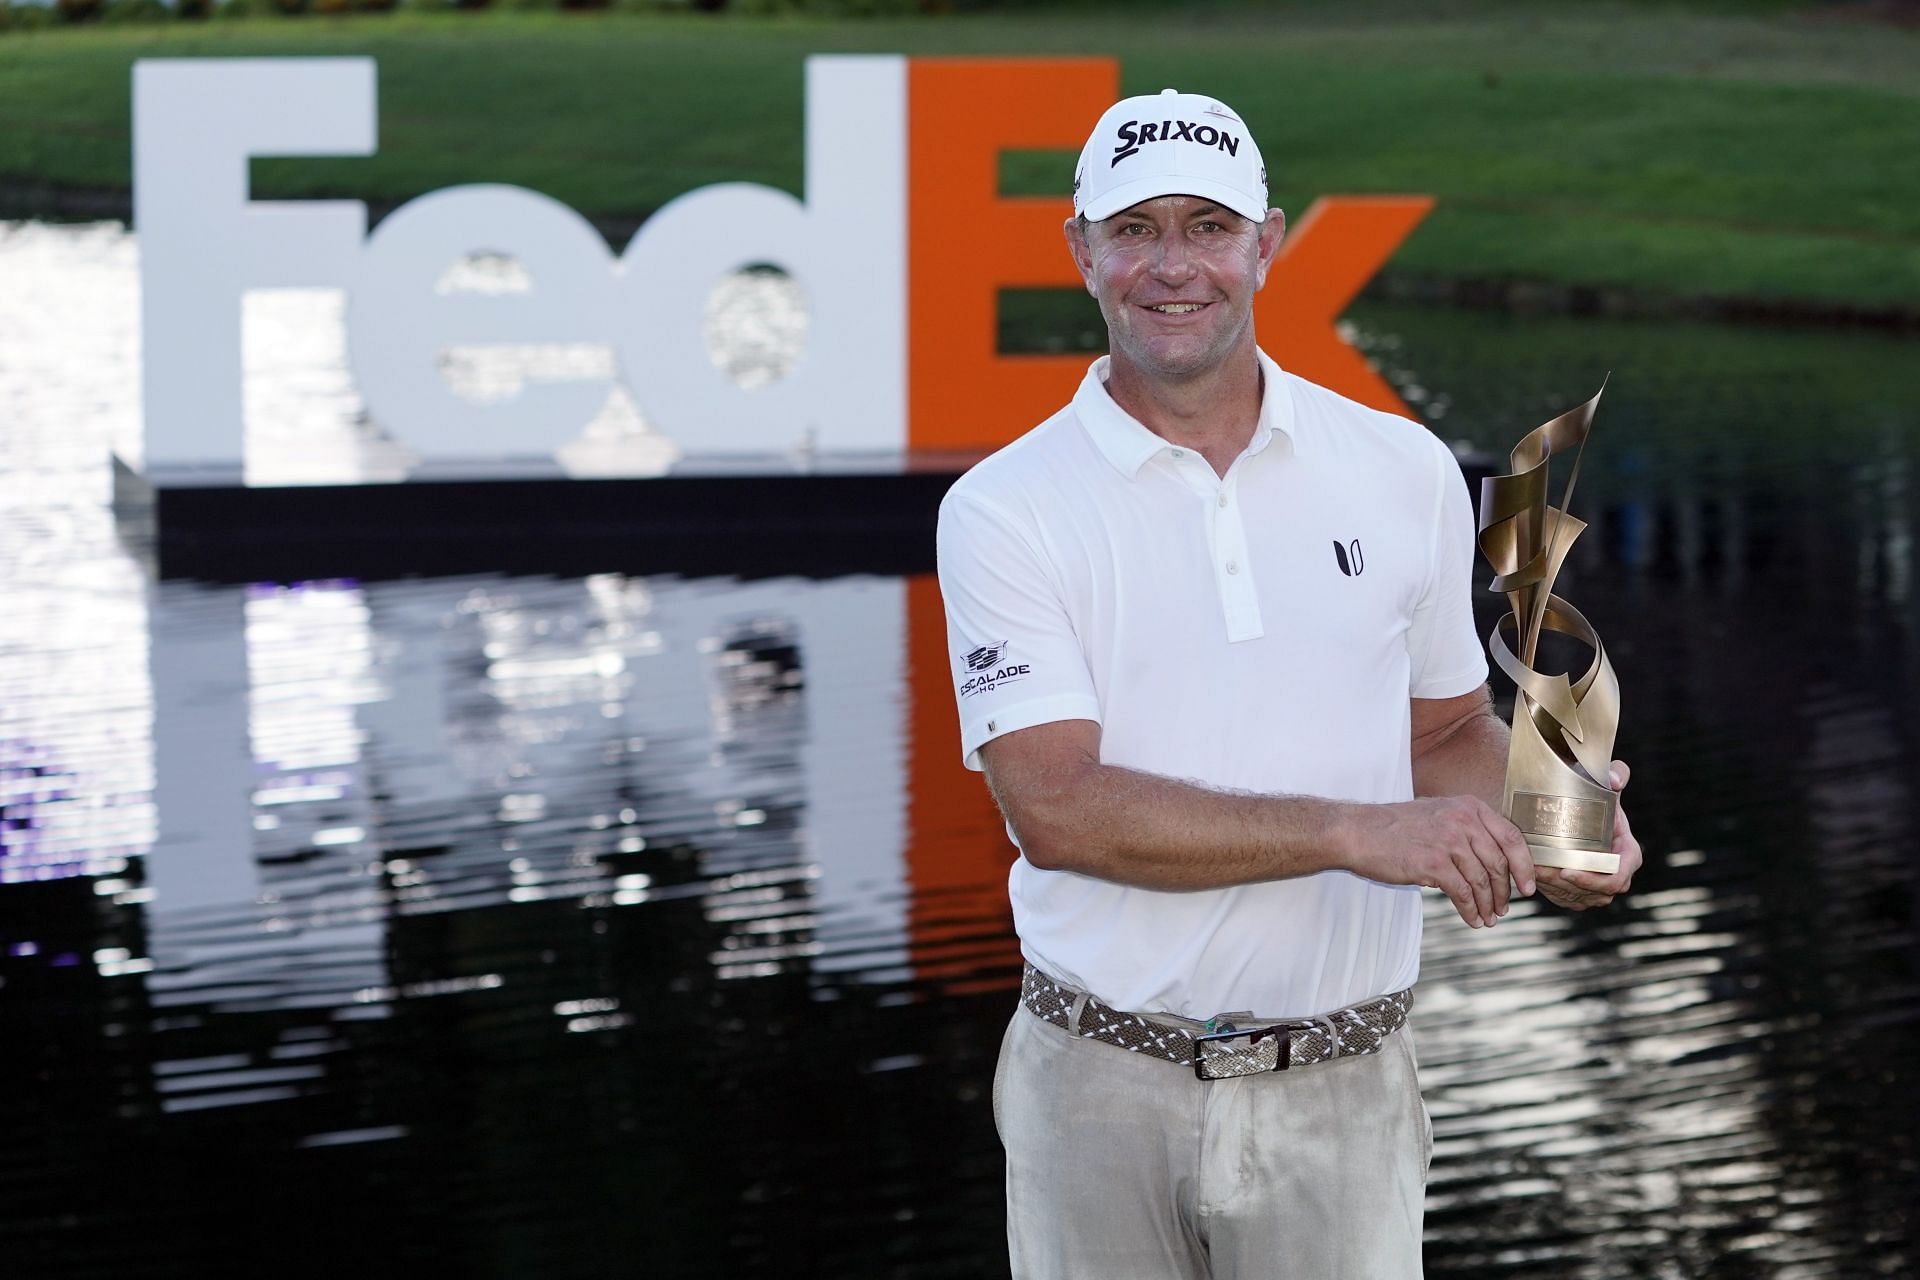 Lucas Glover won the St. Jude Championship this weekend